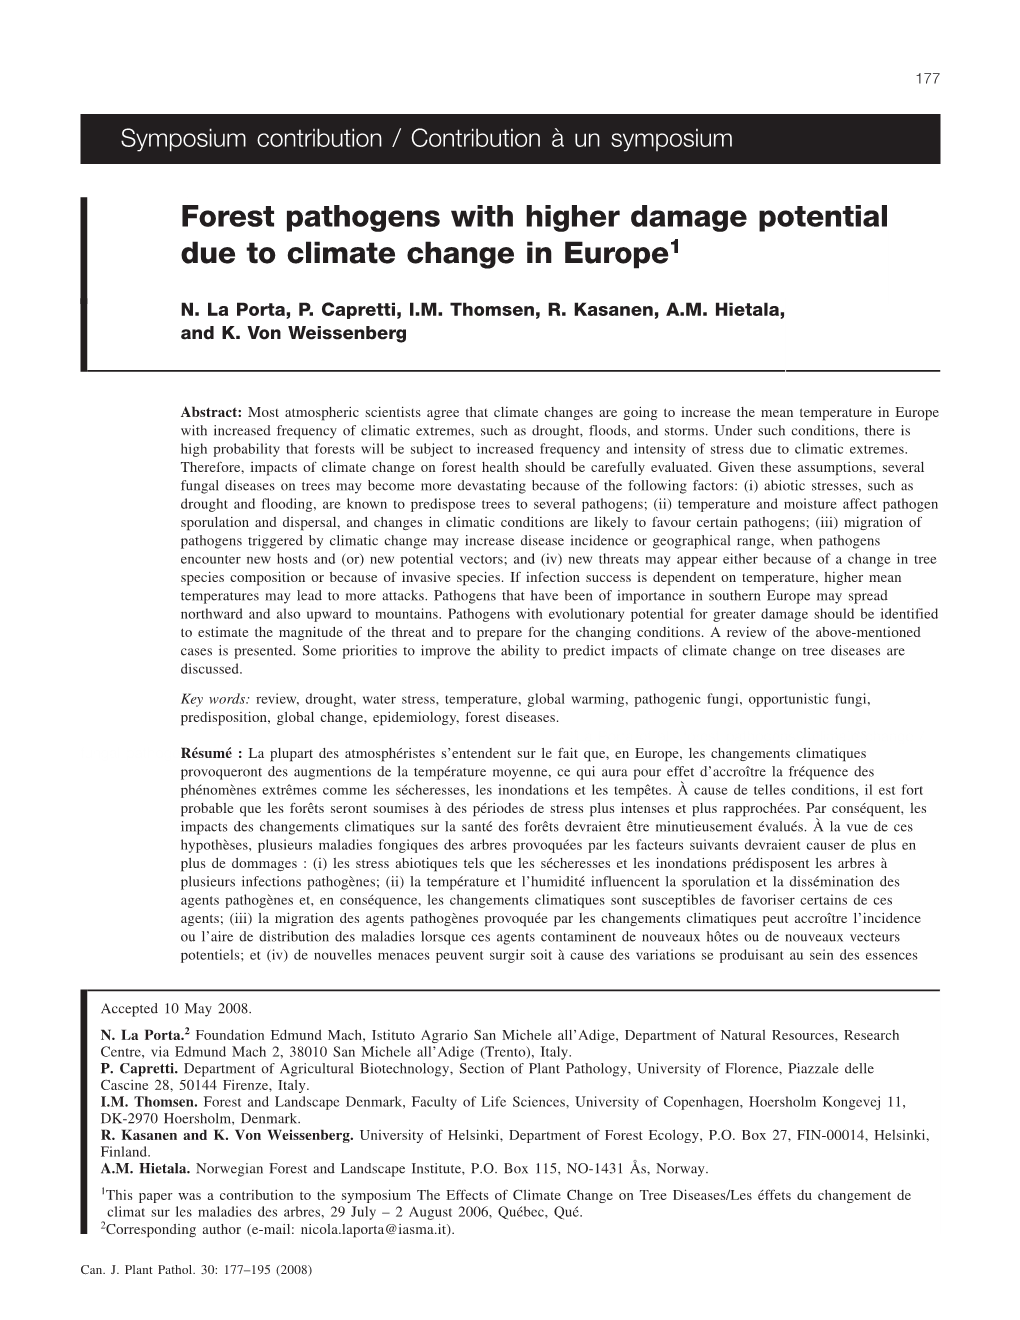 Forest Pathogens with Higher Damage Potential Due to Climate Change in Europe1